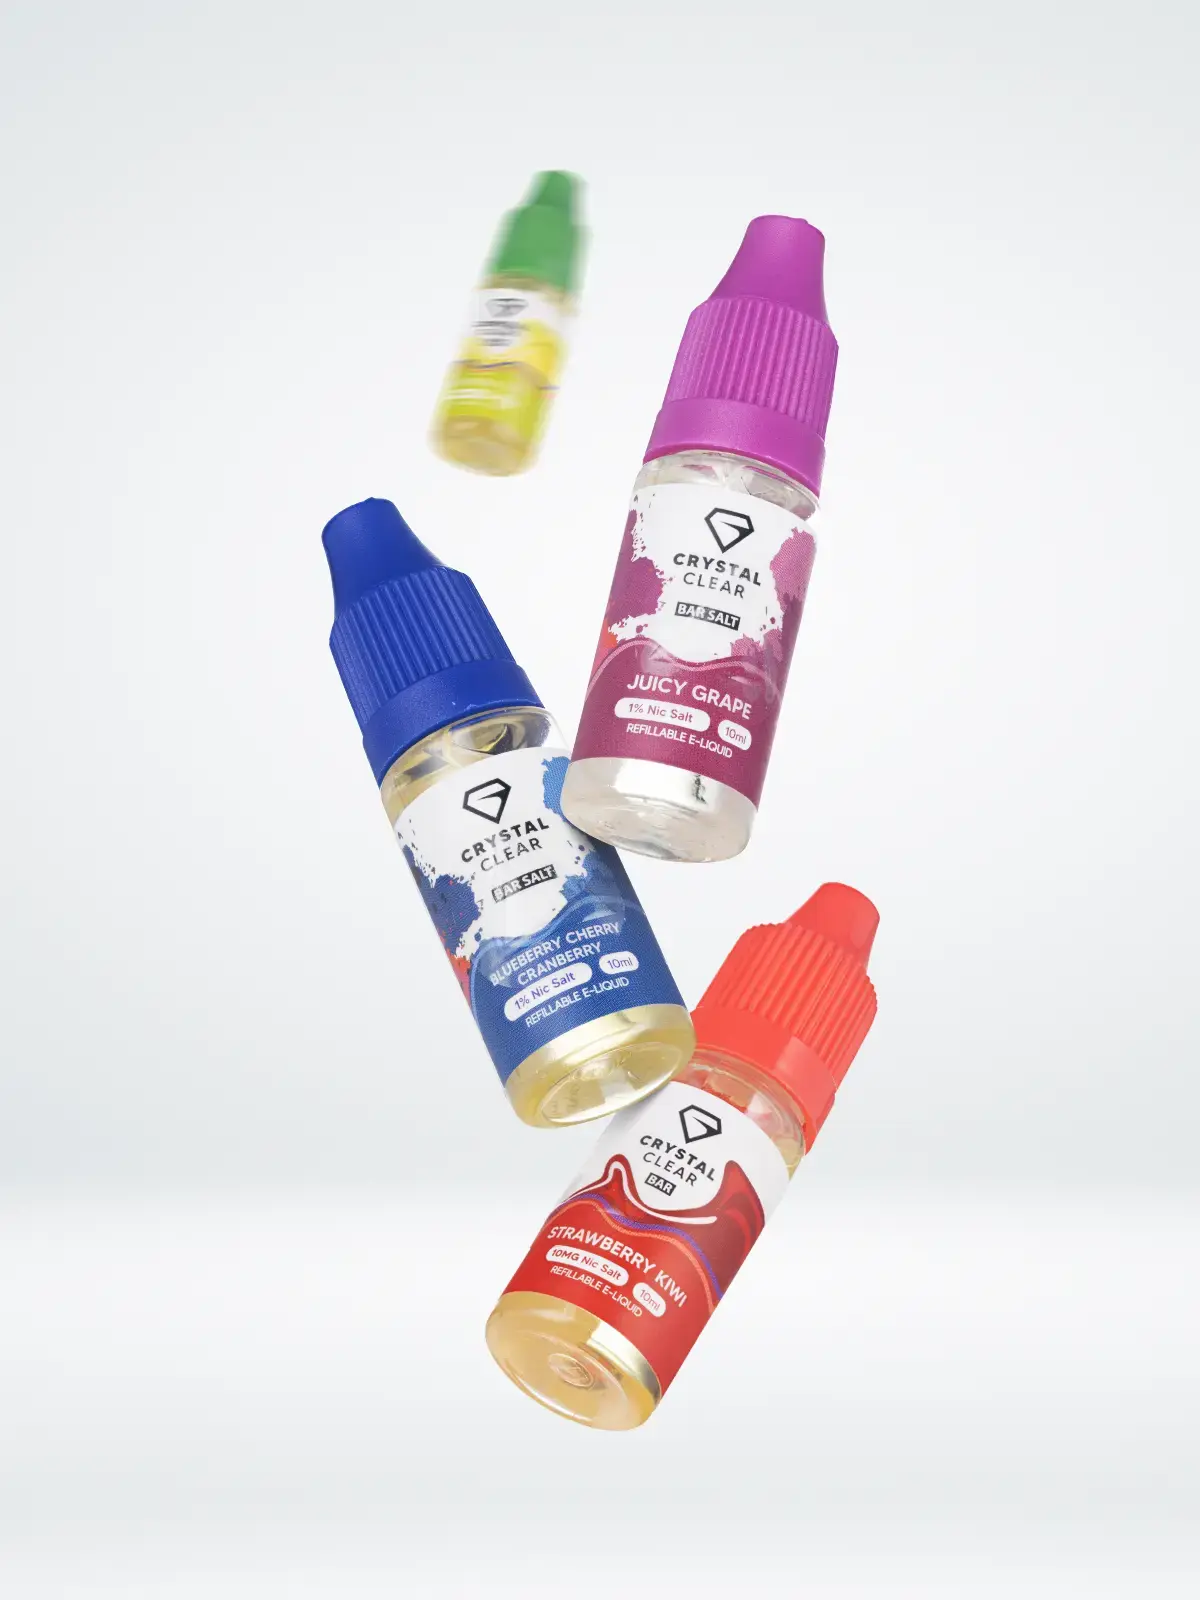 Four Crystal Clear e-liquid bottles floating in front of a light background